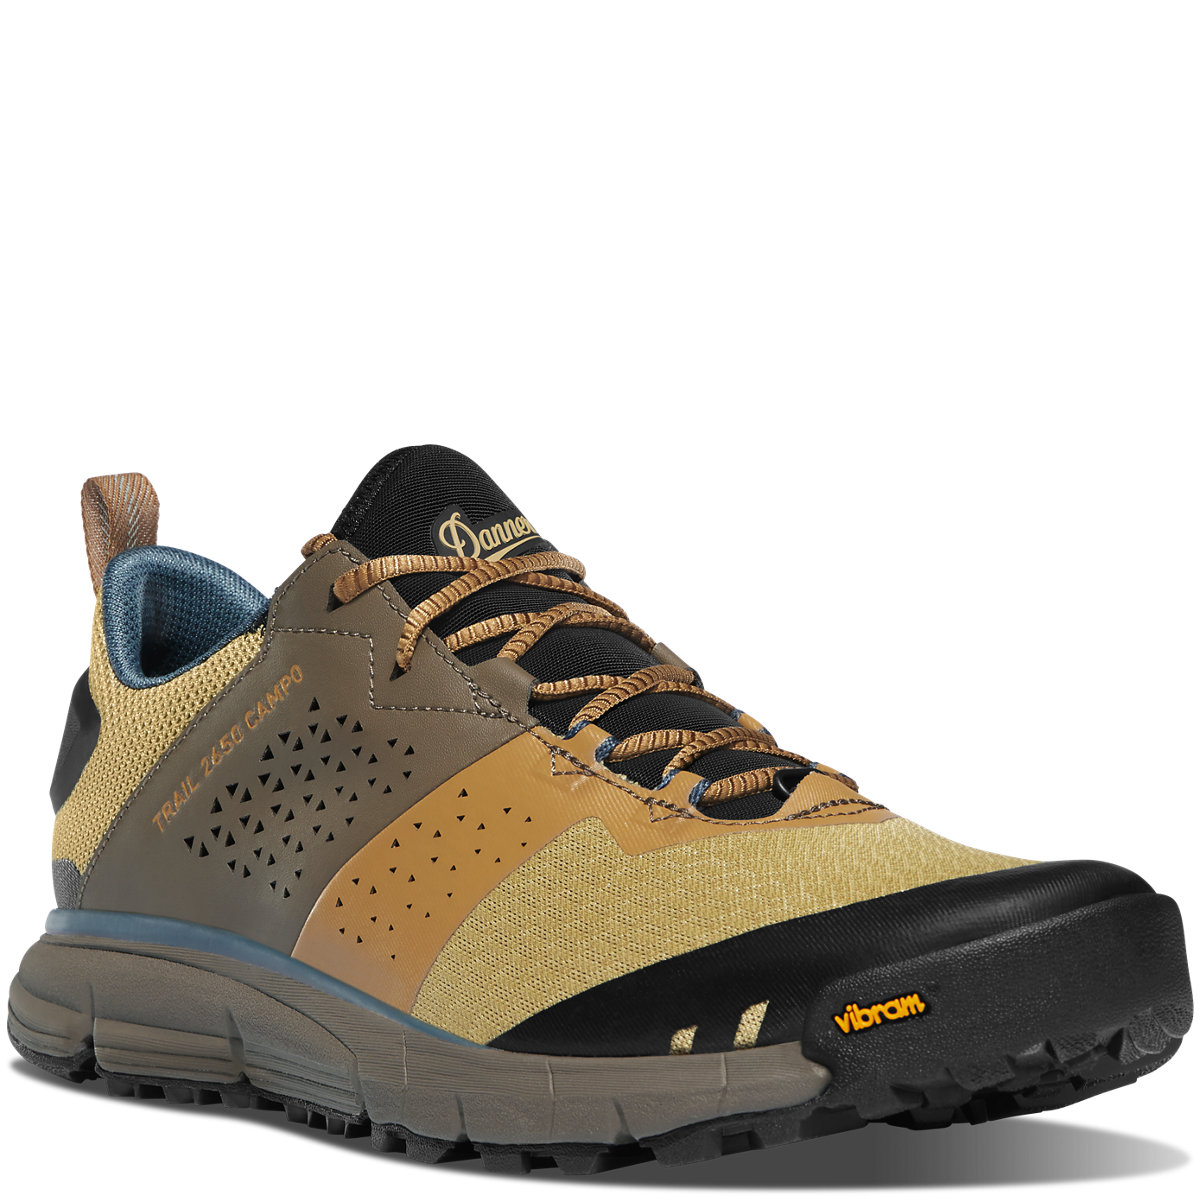 Danner - Trail 2650 Campo Brown/Orion Blue